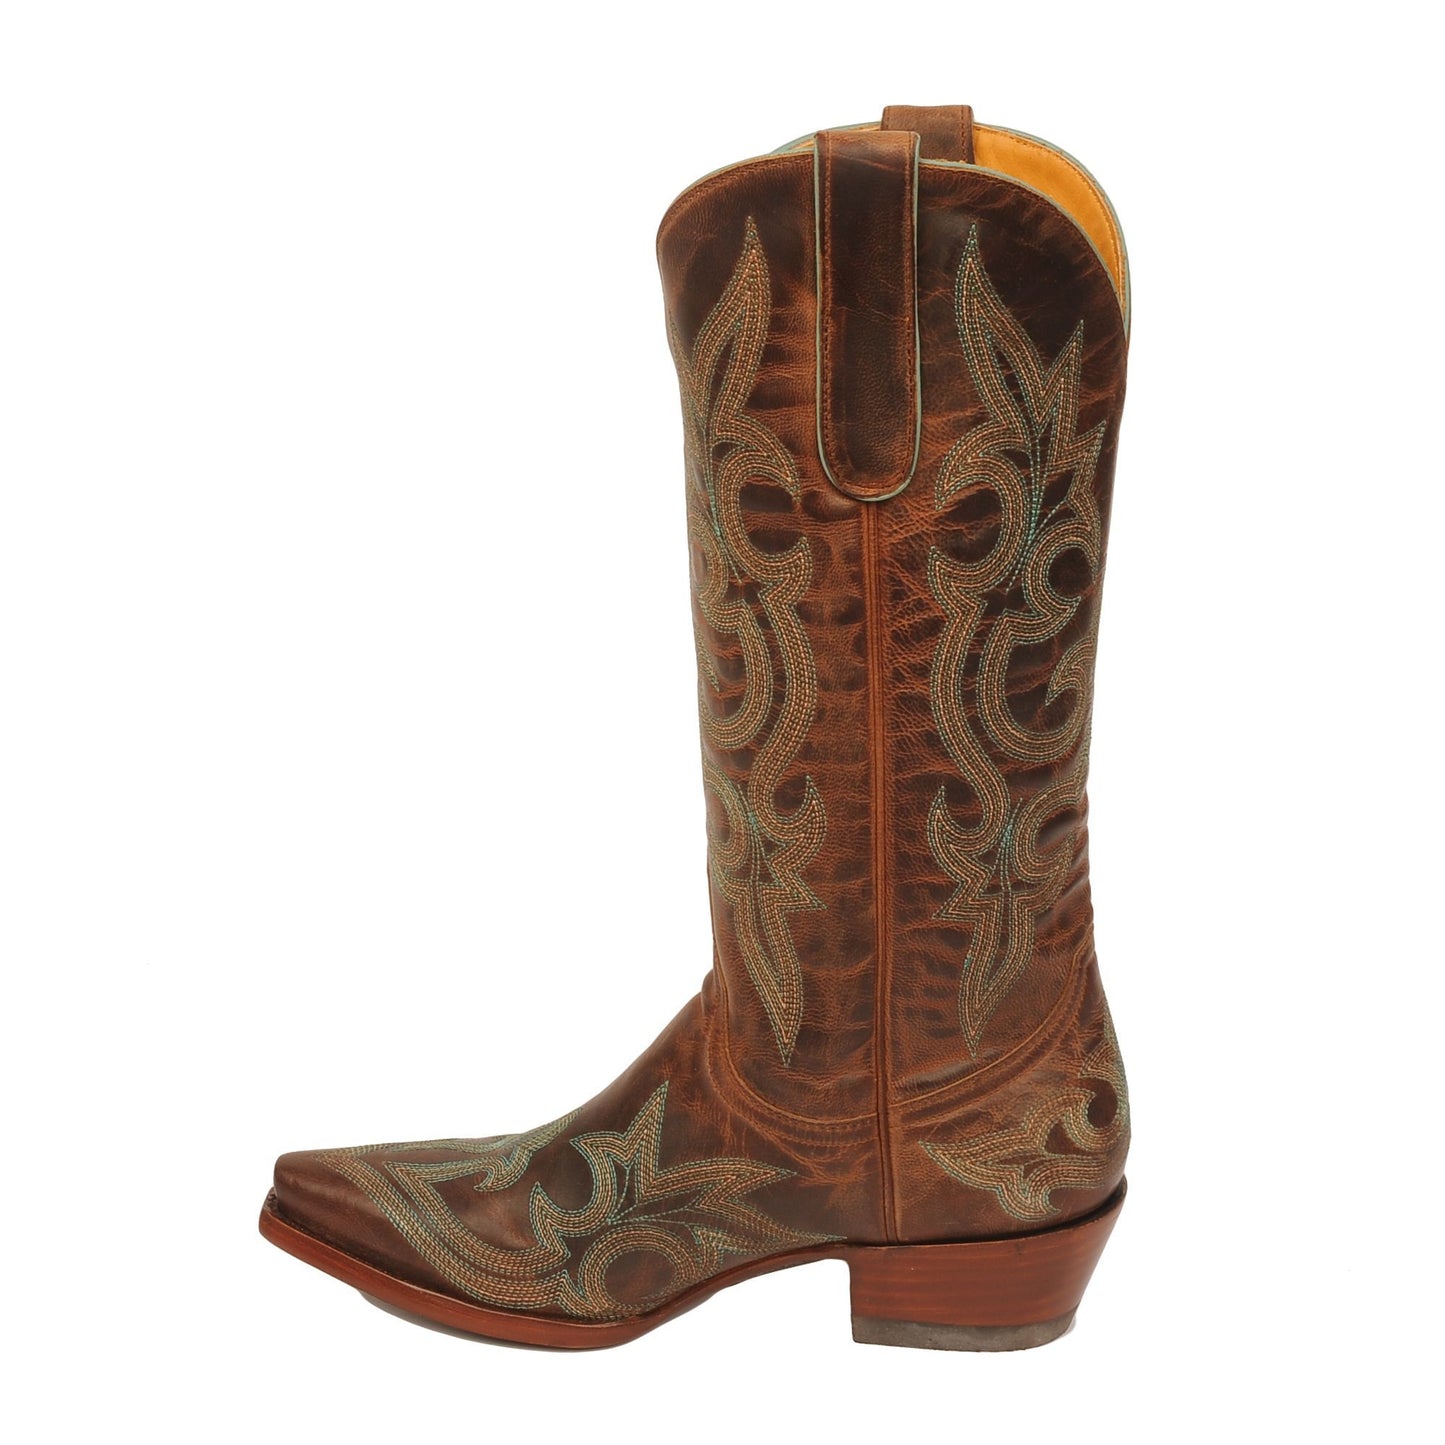 L113-13 Old Gringo Women's DIEGO Brass with Turquoise Stitching Snip Toe Boot